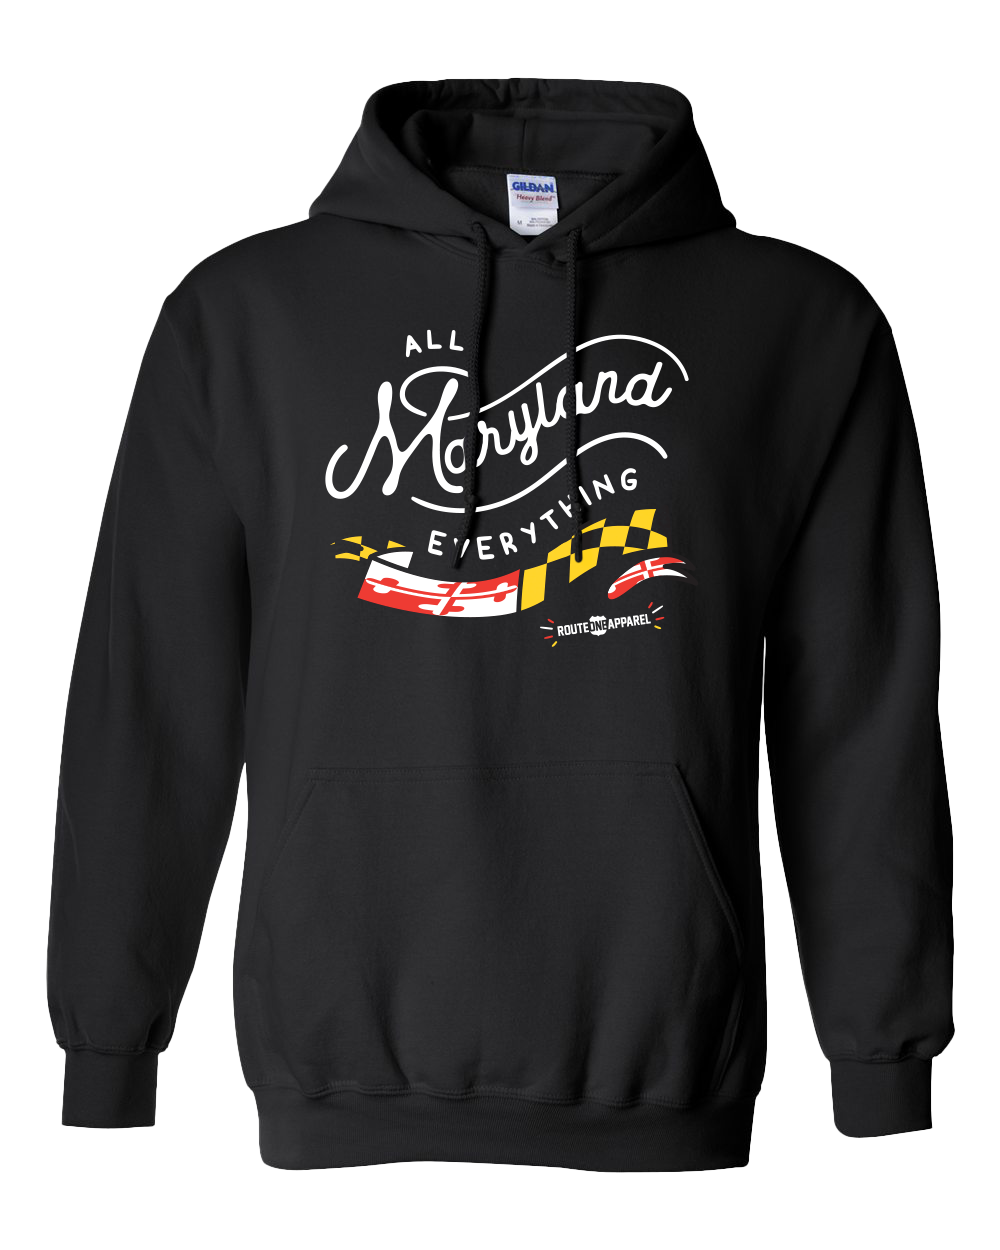 All Maryland Everything (Black) / Hoodie - Route One Apparel